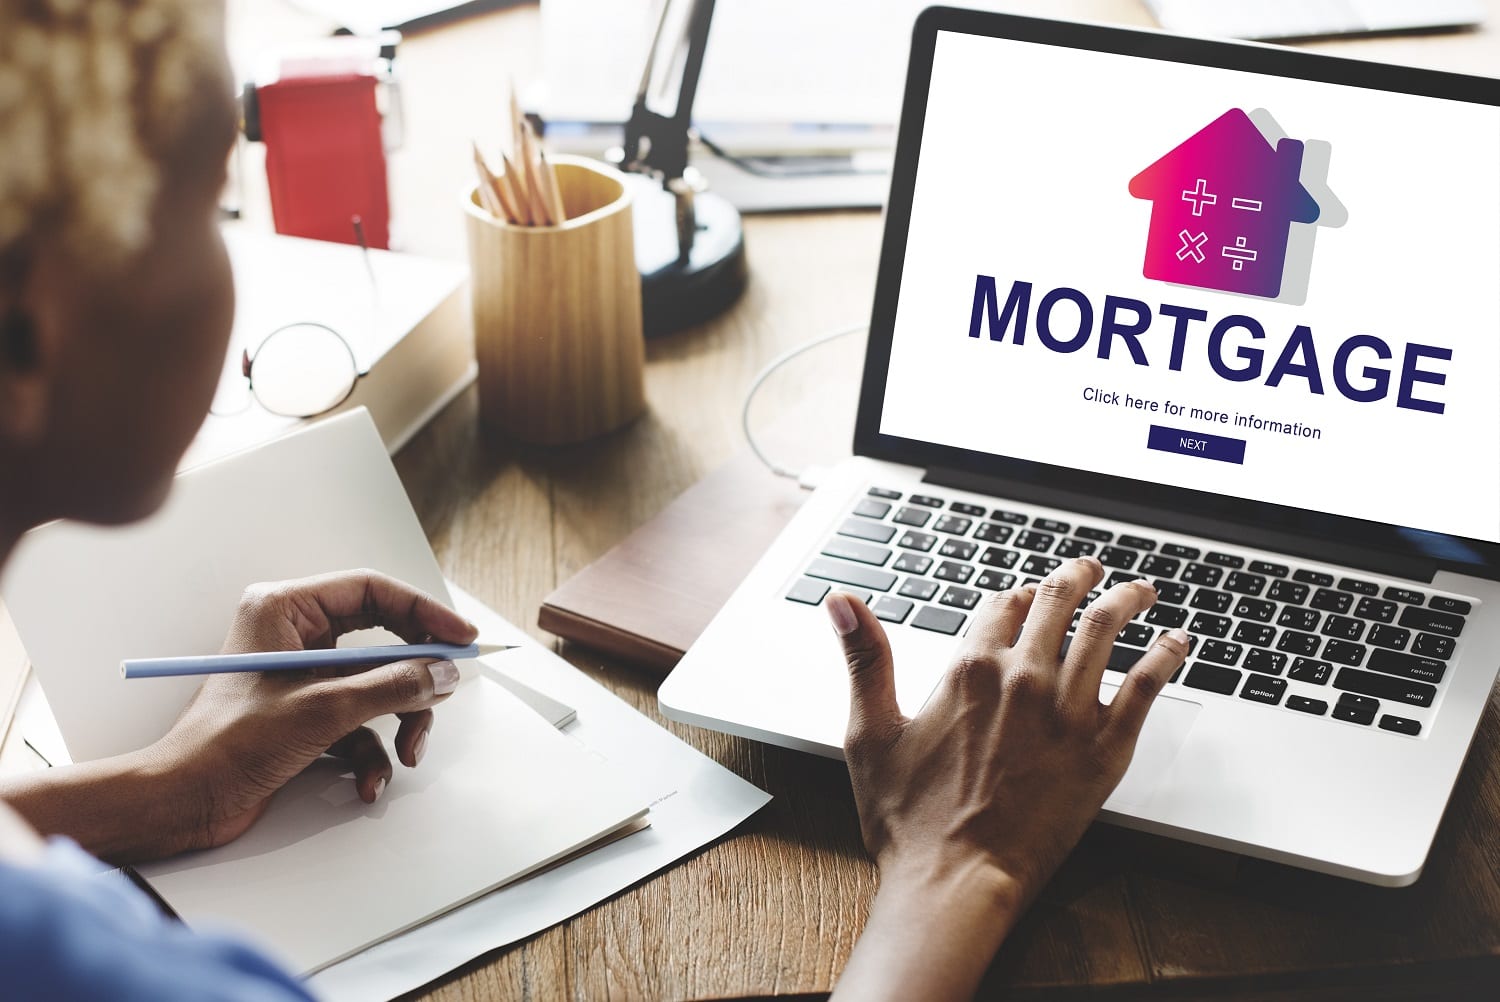 Why You Should Shop for a Mortgage Loan